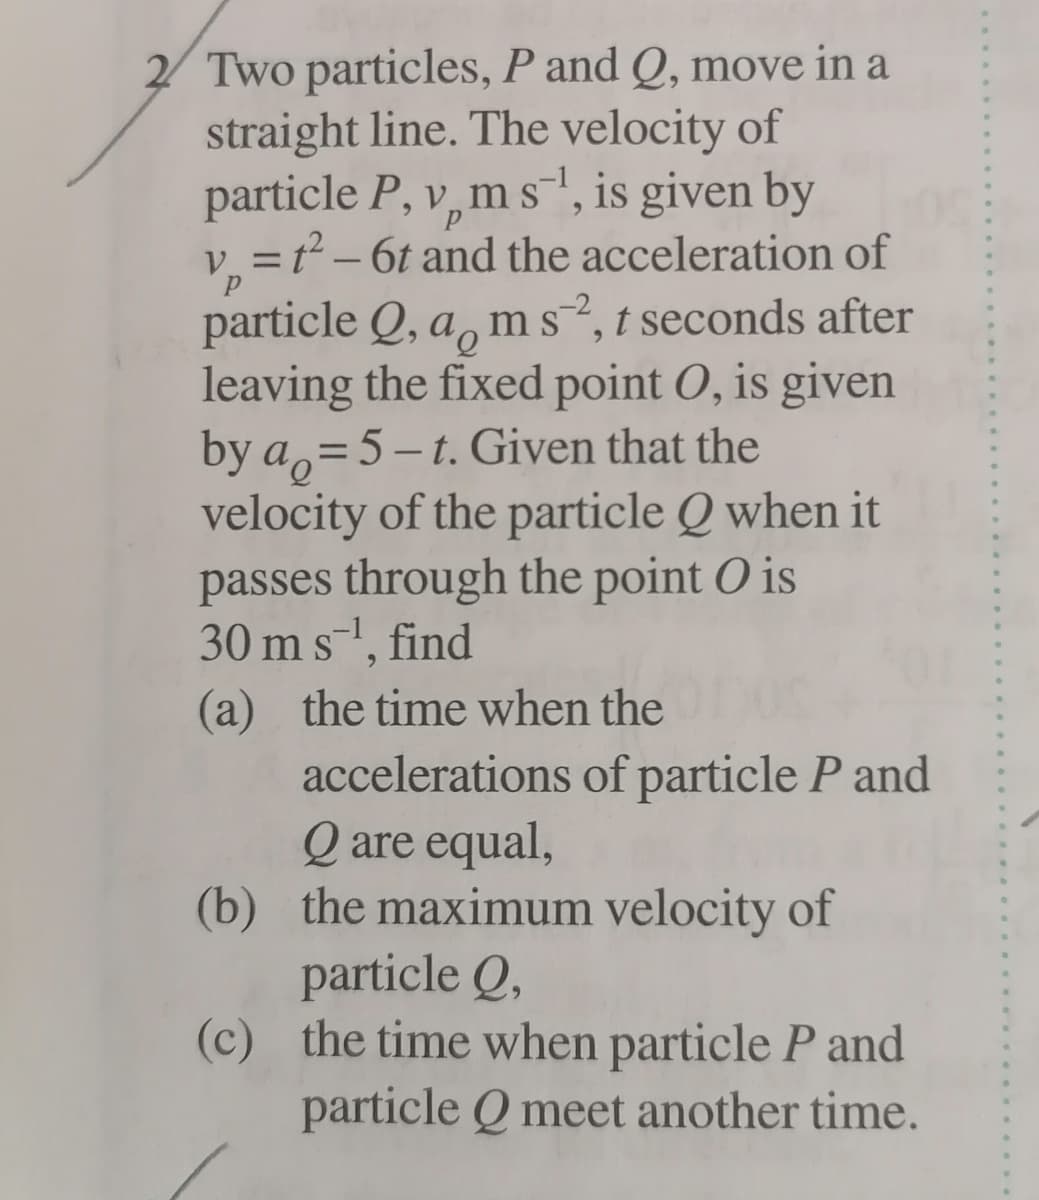 2 Two particles, P and Q, move in a
straight line. The velocity of
particle P, v, m s", is given by
= f² – 6t and the acceleration of
particle Q, a, ms?, t seconds after
leaving the fixed point O, is given
by a,=5-t. Given that the
velocity of the particle Q when it
passes through the point O is
30 ms, find
(a) the time when the
accelerations of particle P and
Q are equal,
(b) the maximum velocity of
particle Q,
(c) the time when particle P and
particle Q meet another time.
%3D
